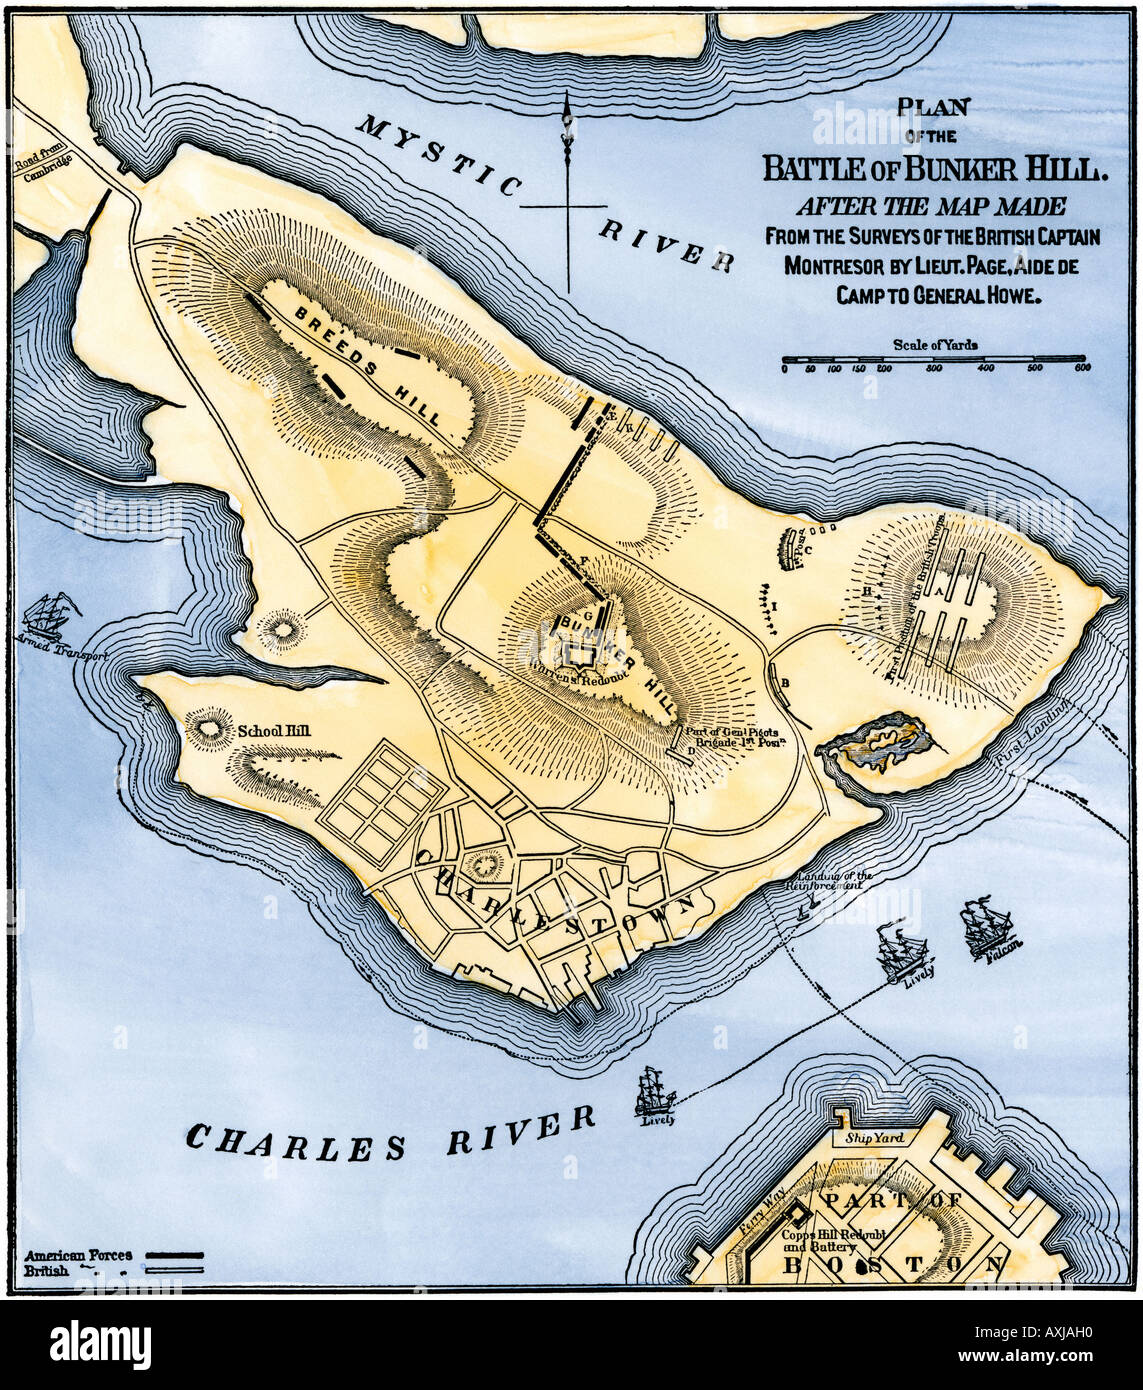 Map Of The Battle Of Bunker Hill Drawn From A British Map Hand Colored AXJAH0 